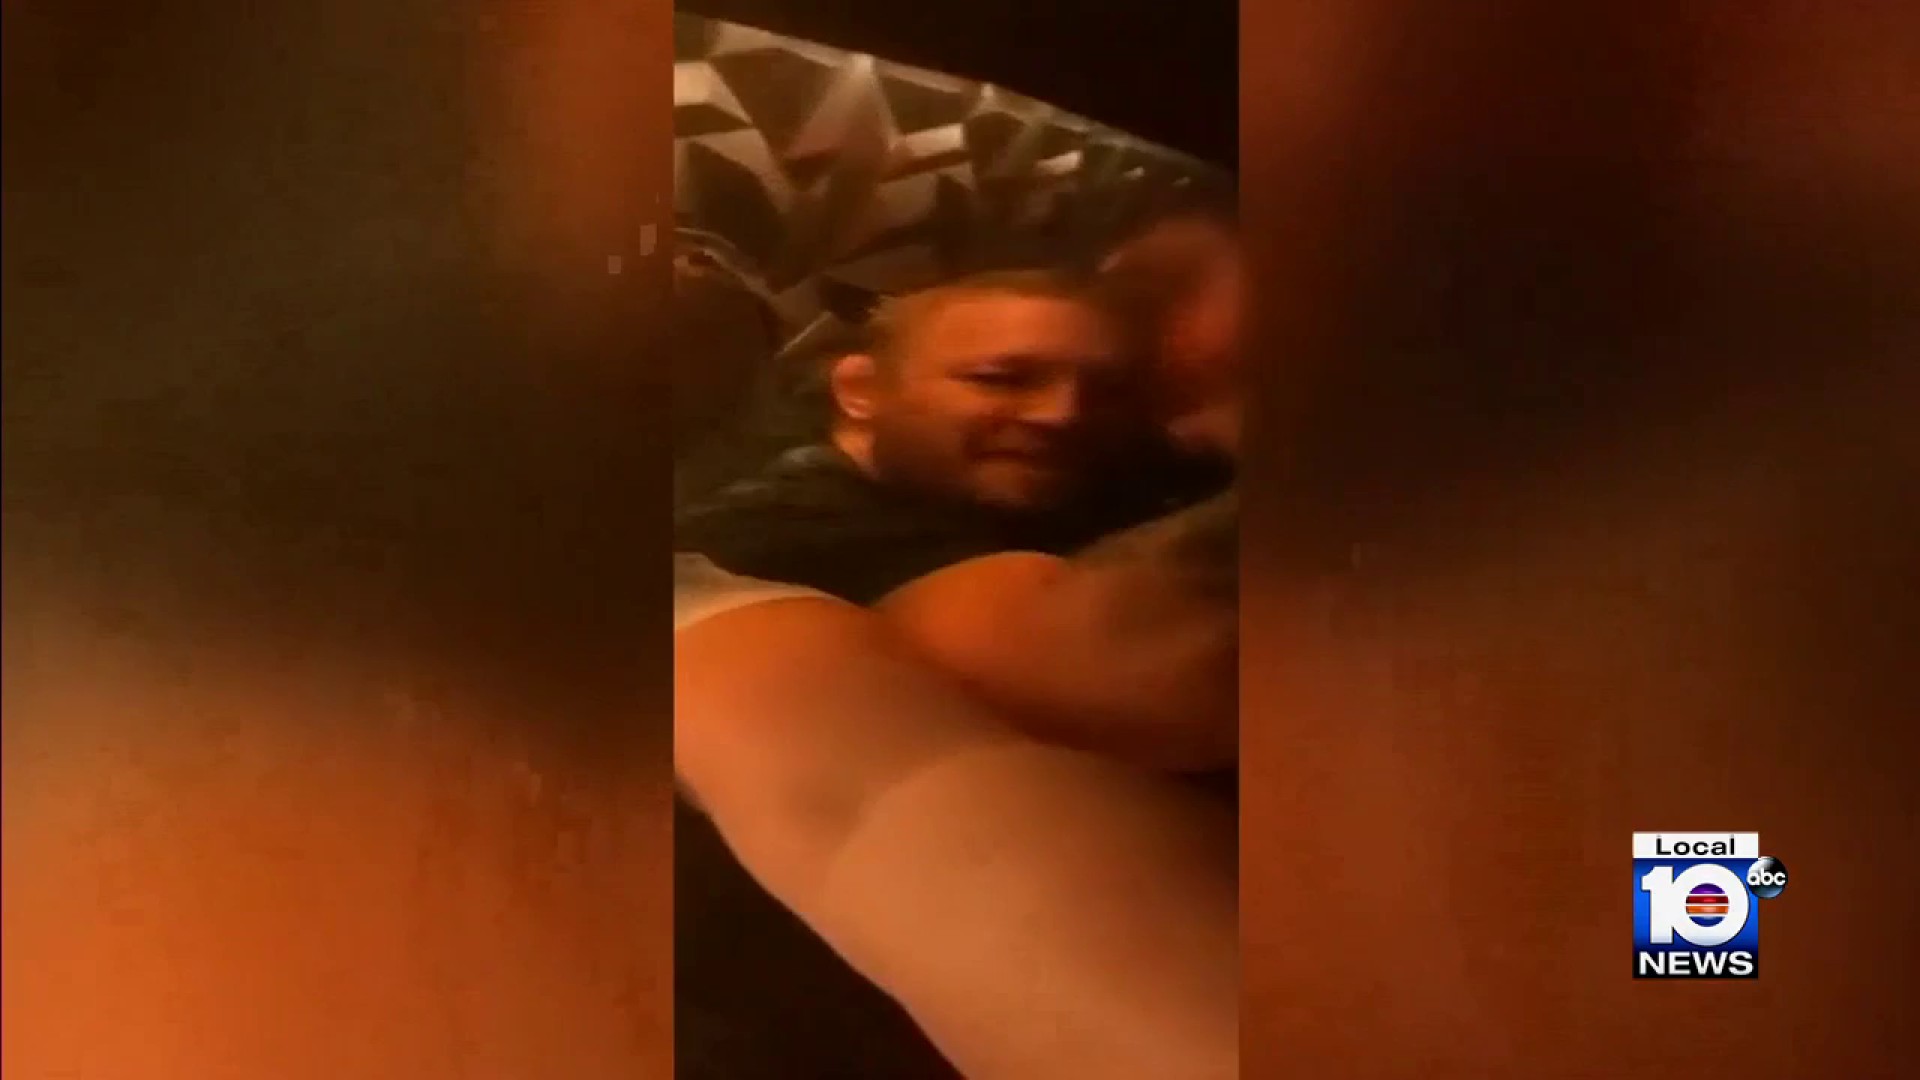 Rape Girls X Video - More video surfaces of Conor McGregor with woman who alleges rape